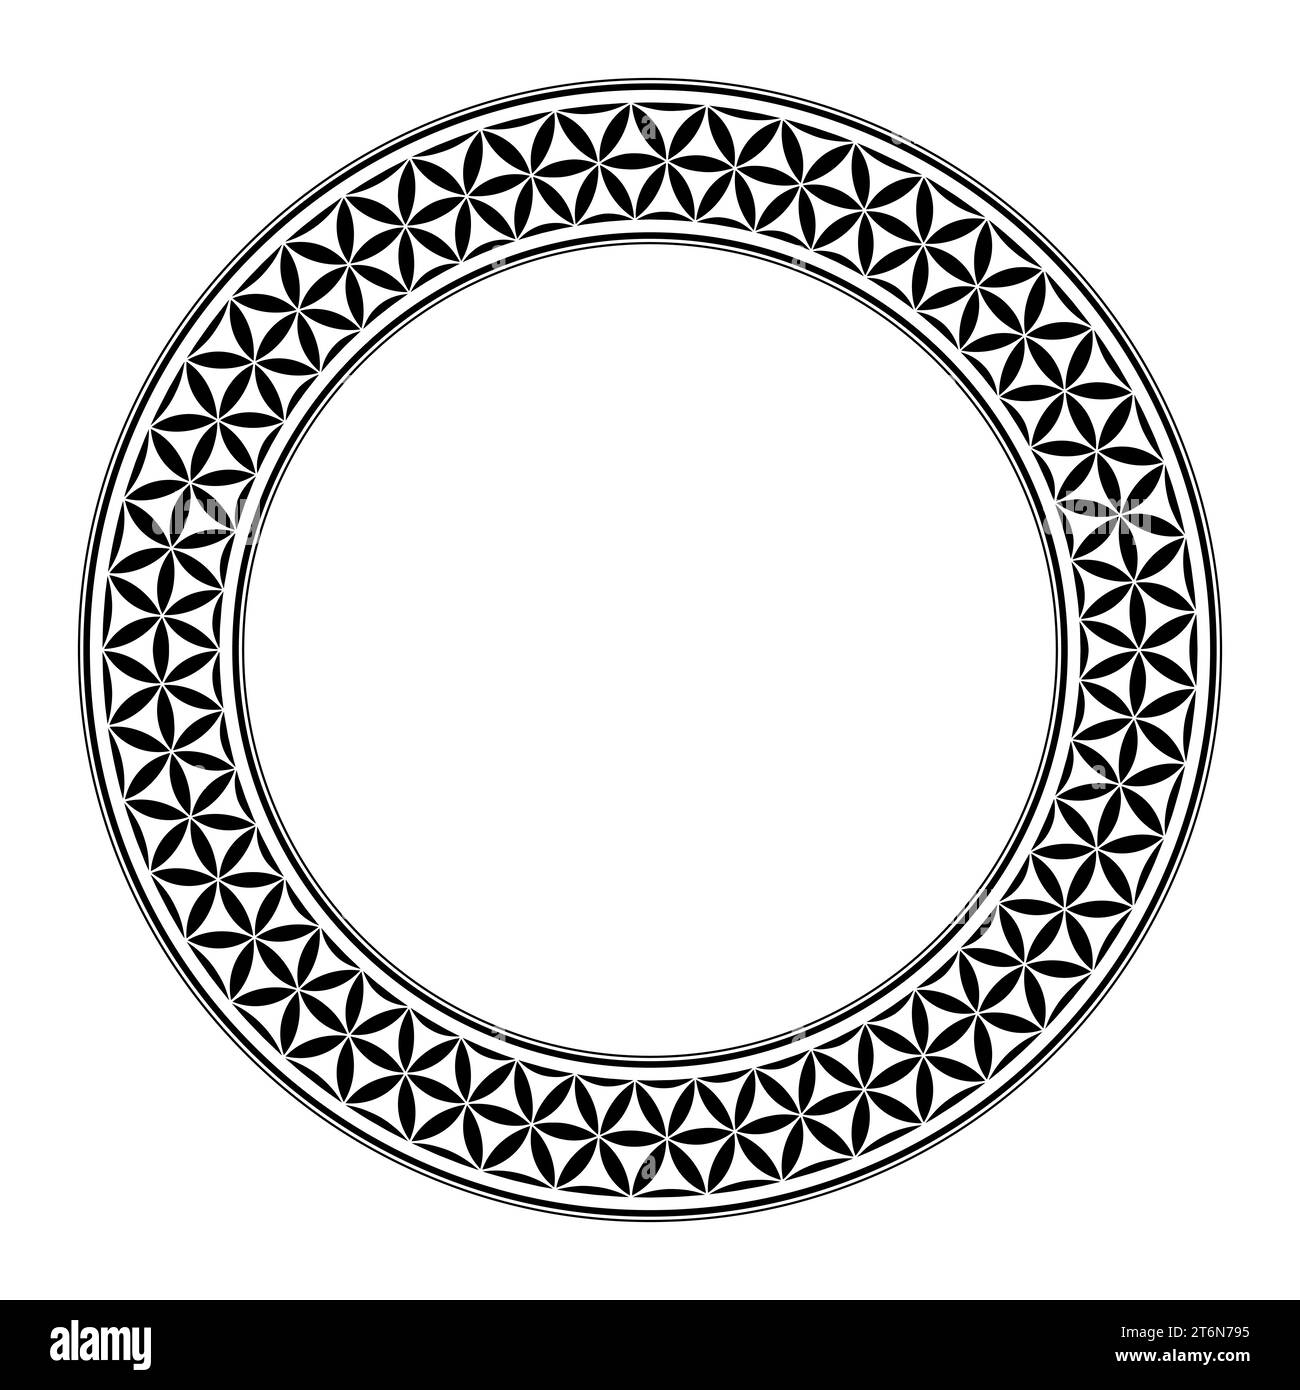 Flower of Life pattern, circle frame. Decorative border, created with hexagonal arranged lens shapes, that can be found in the Flower of Life pattern. Stock Photo